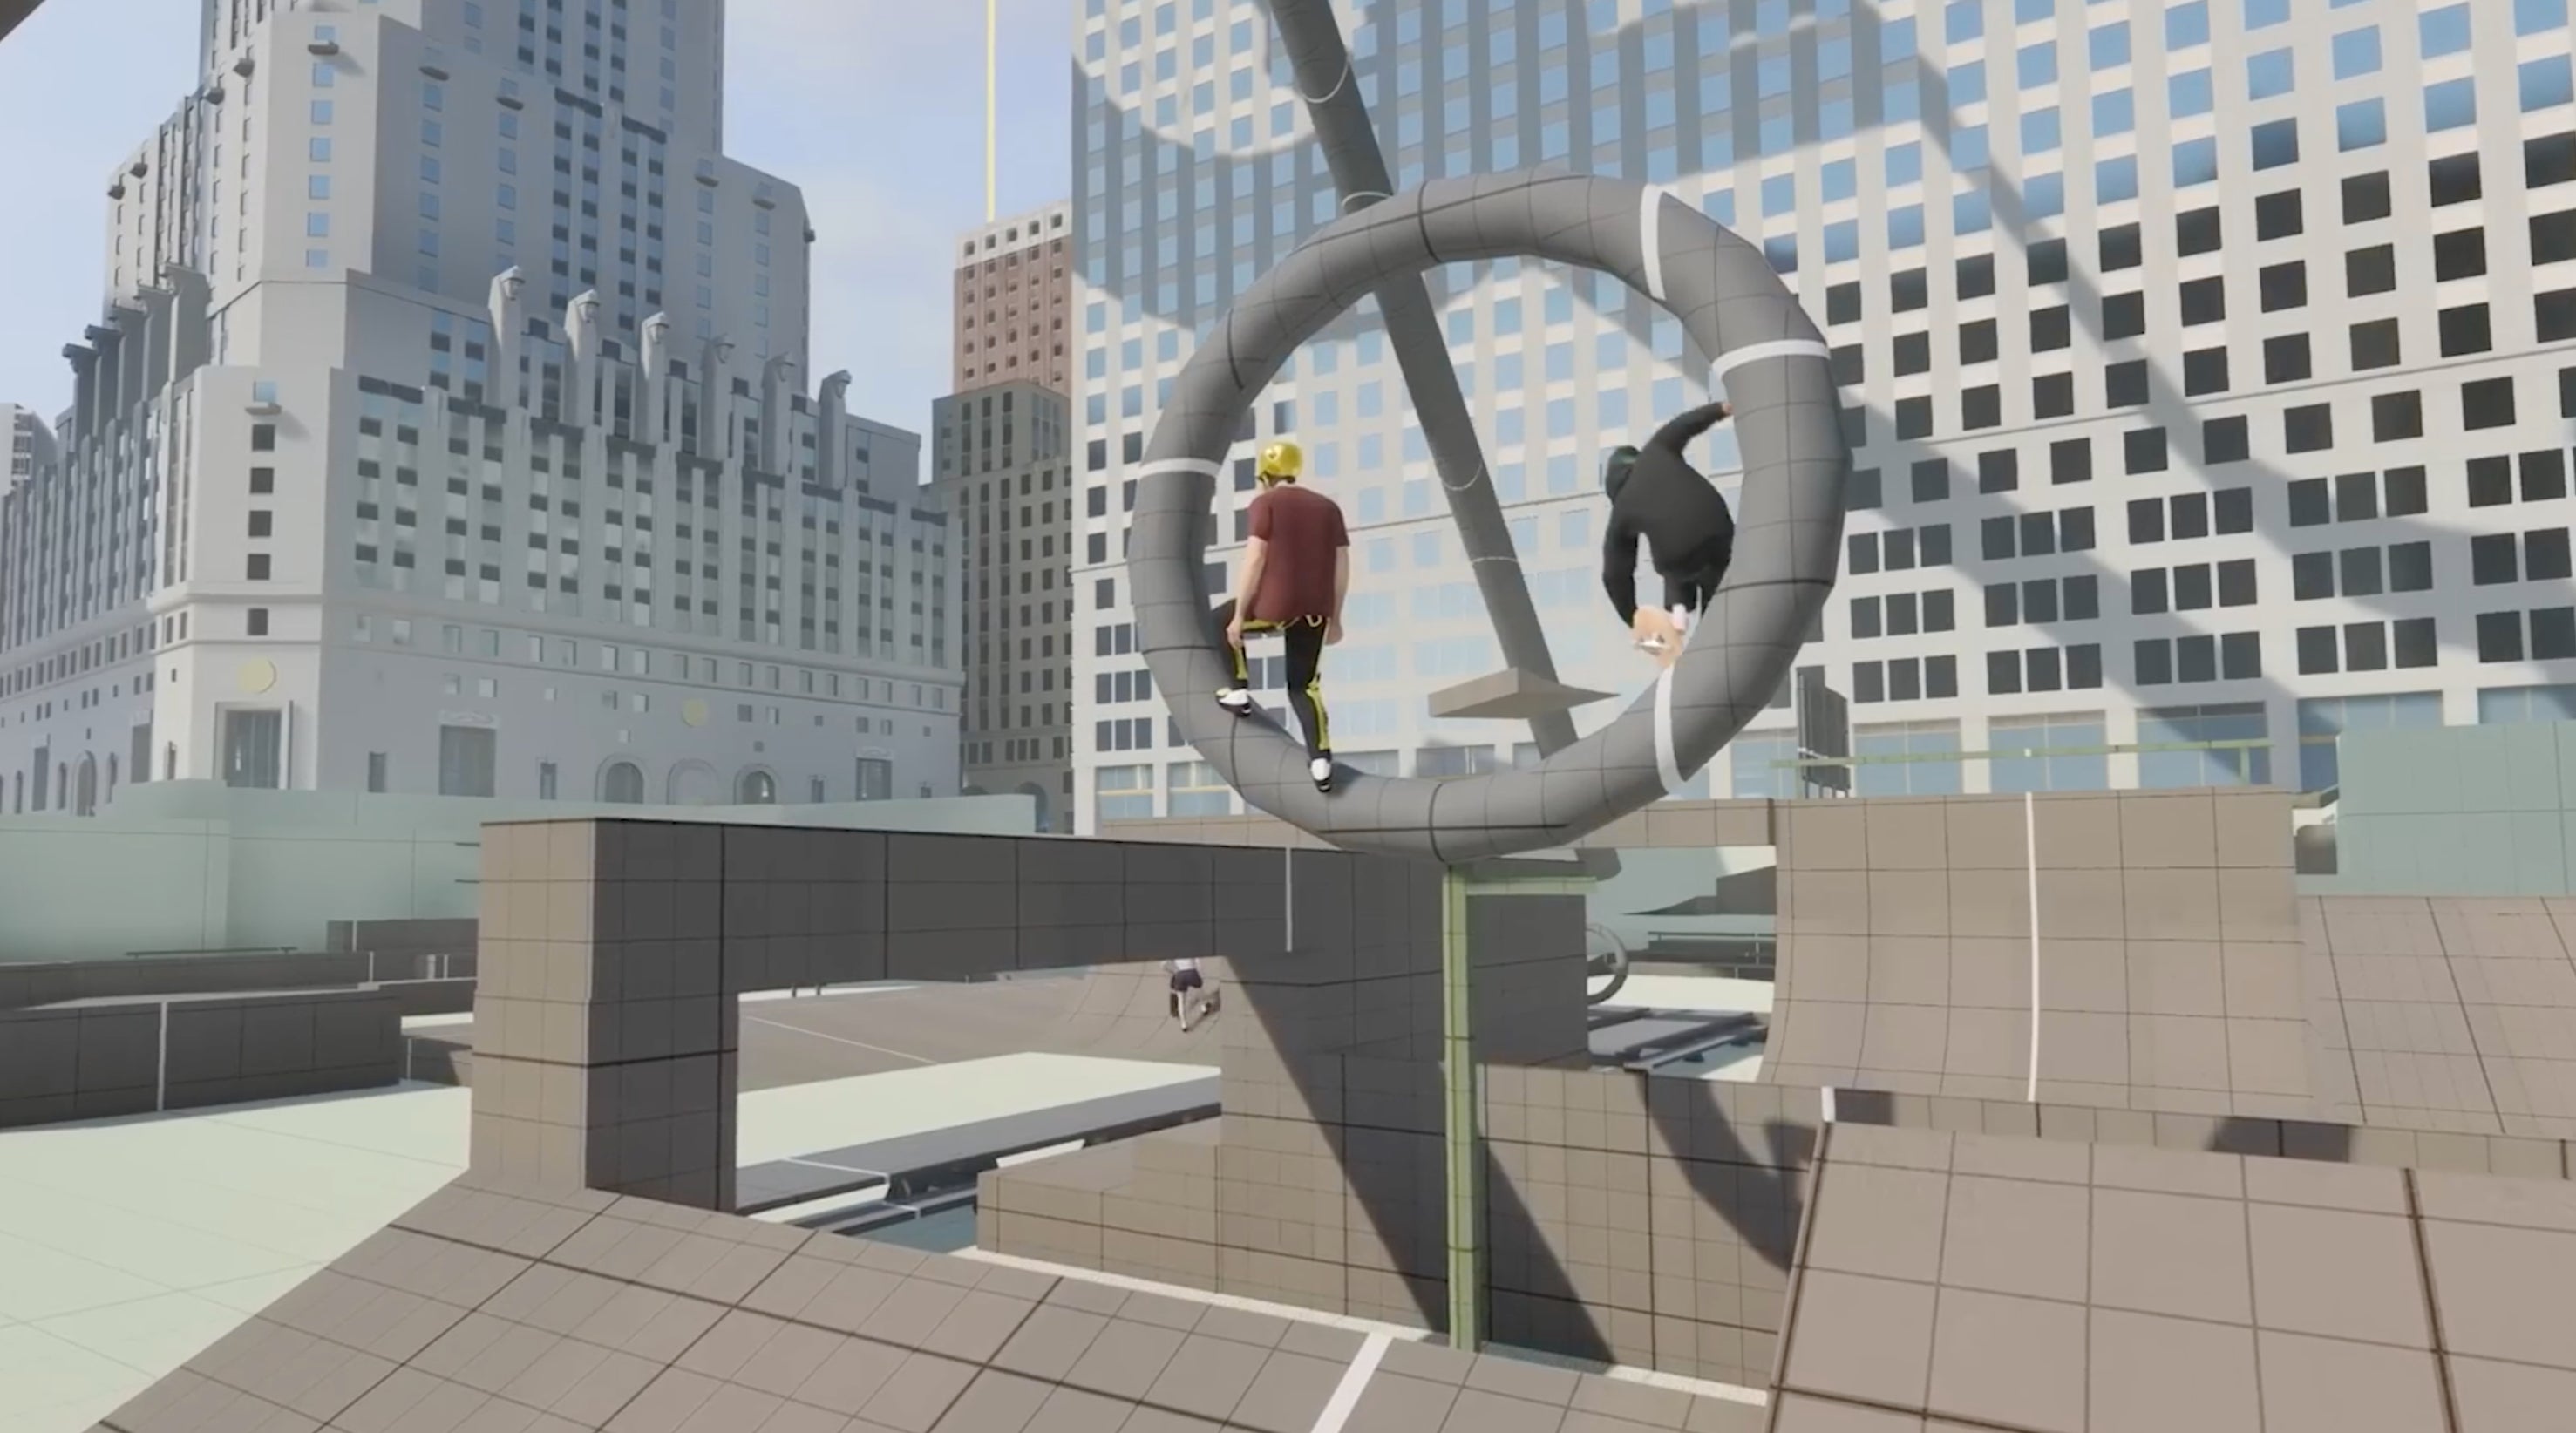 Two skateboarders grind through a whitebox level in the skate playtests